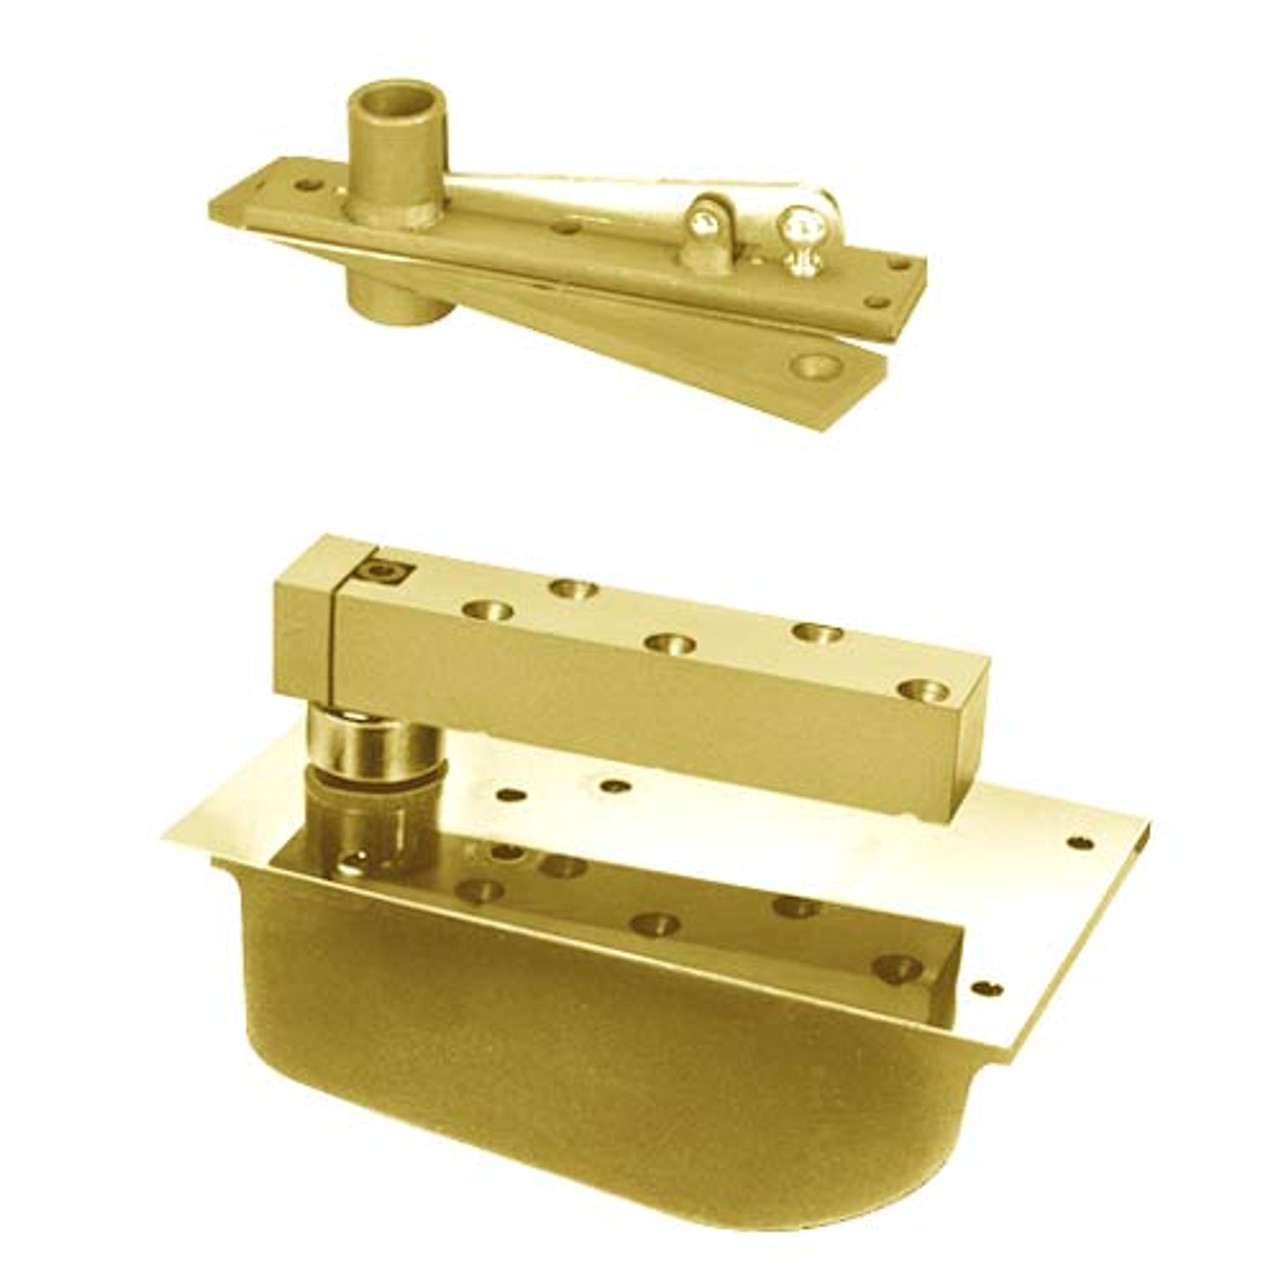 H28-95N-LTP-LH-606 Rixson 28 Series Heavy Duty Single Acting Center Hung Floor Closer in Satin Brass Finish